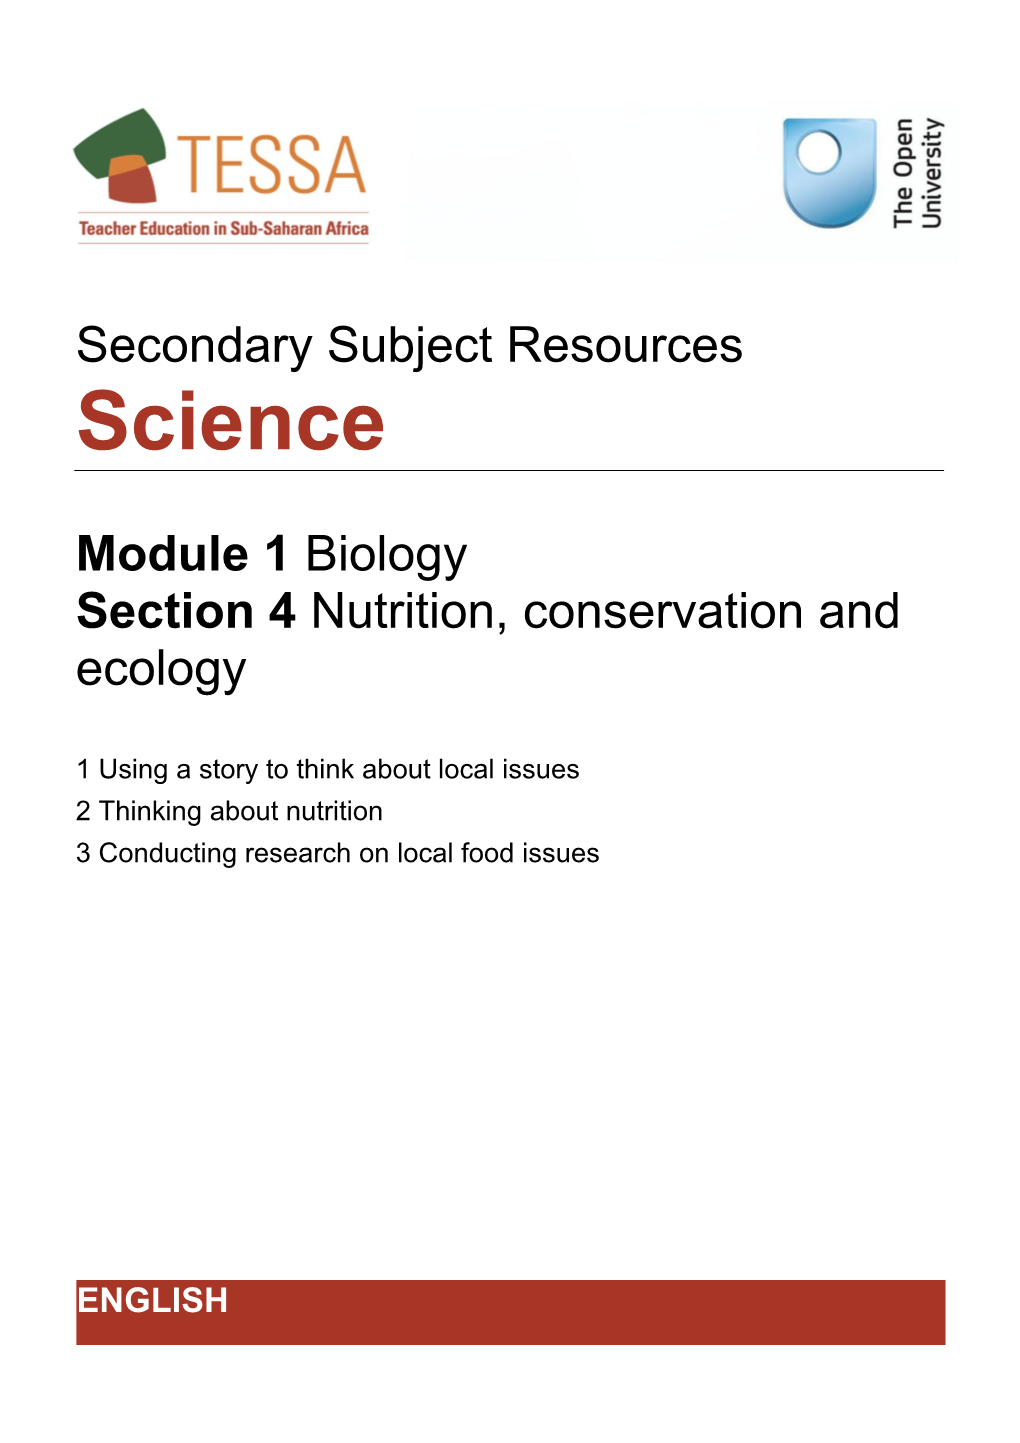 Section 4 : Nutrition, Conservation and Ecology